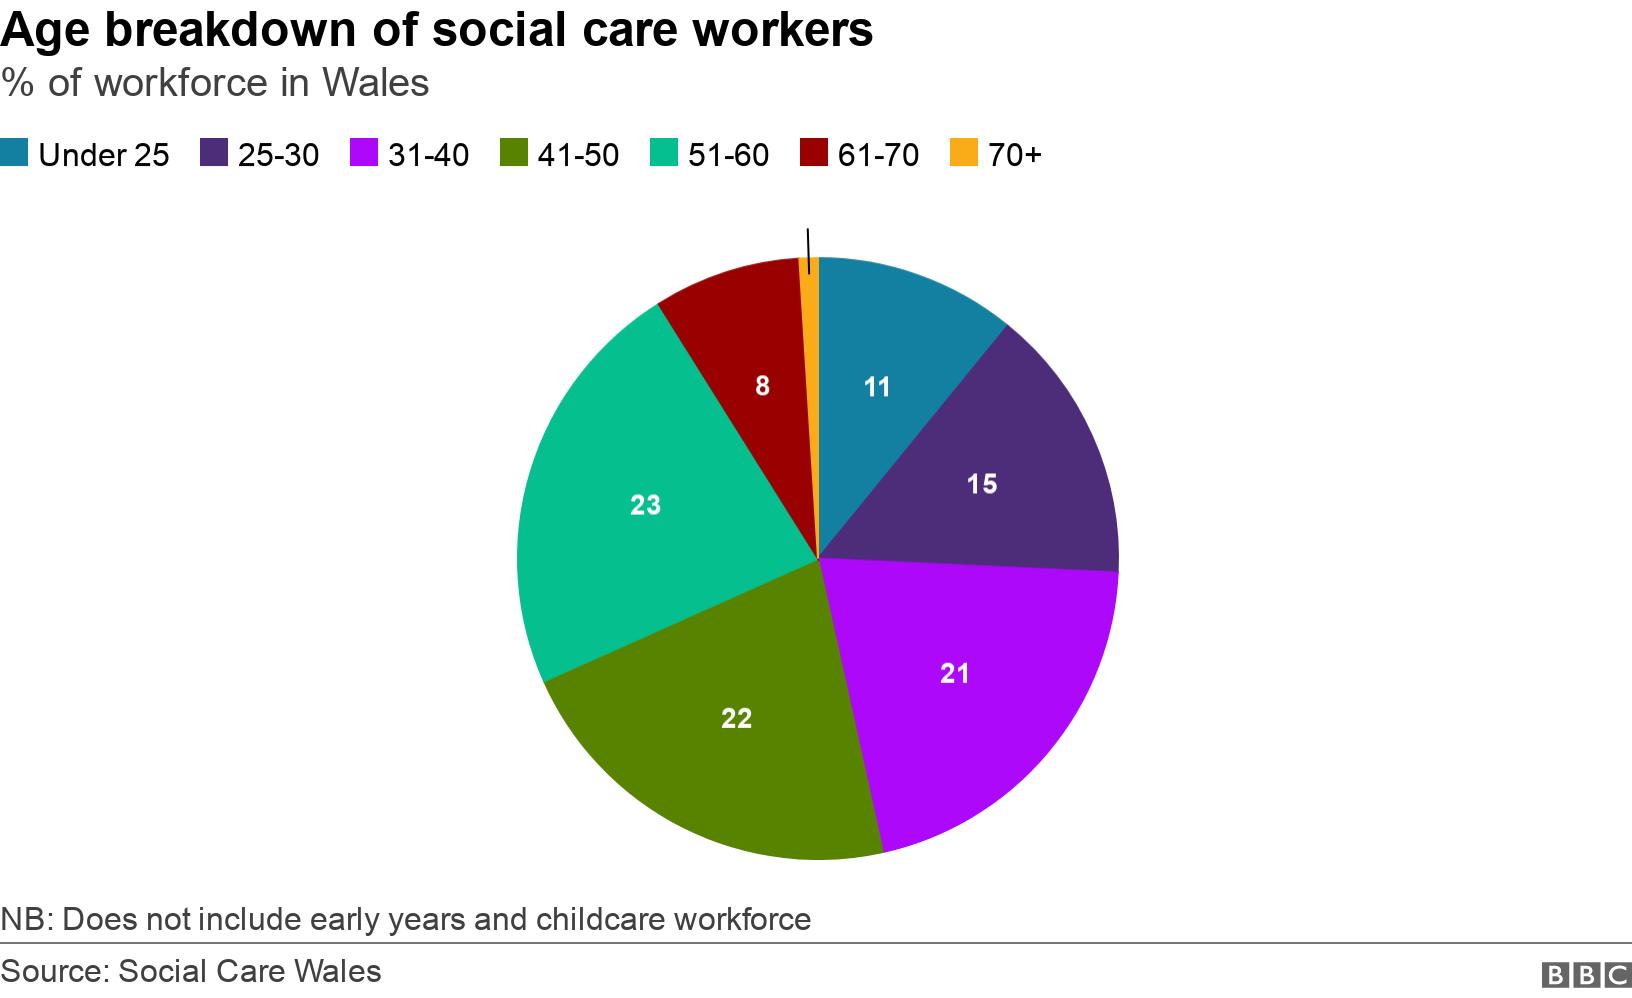 Age breakdown of social care workers. % of workforce in Wales.  NB: Does not include early years and childcare workforce.